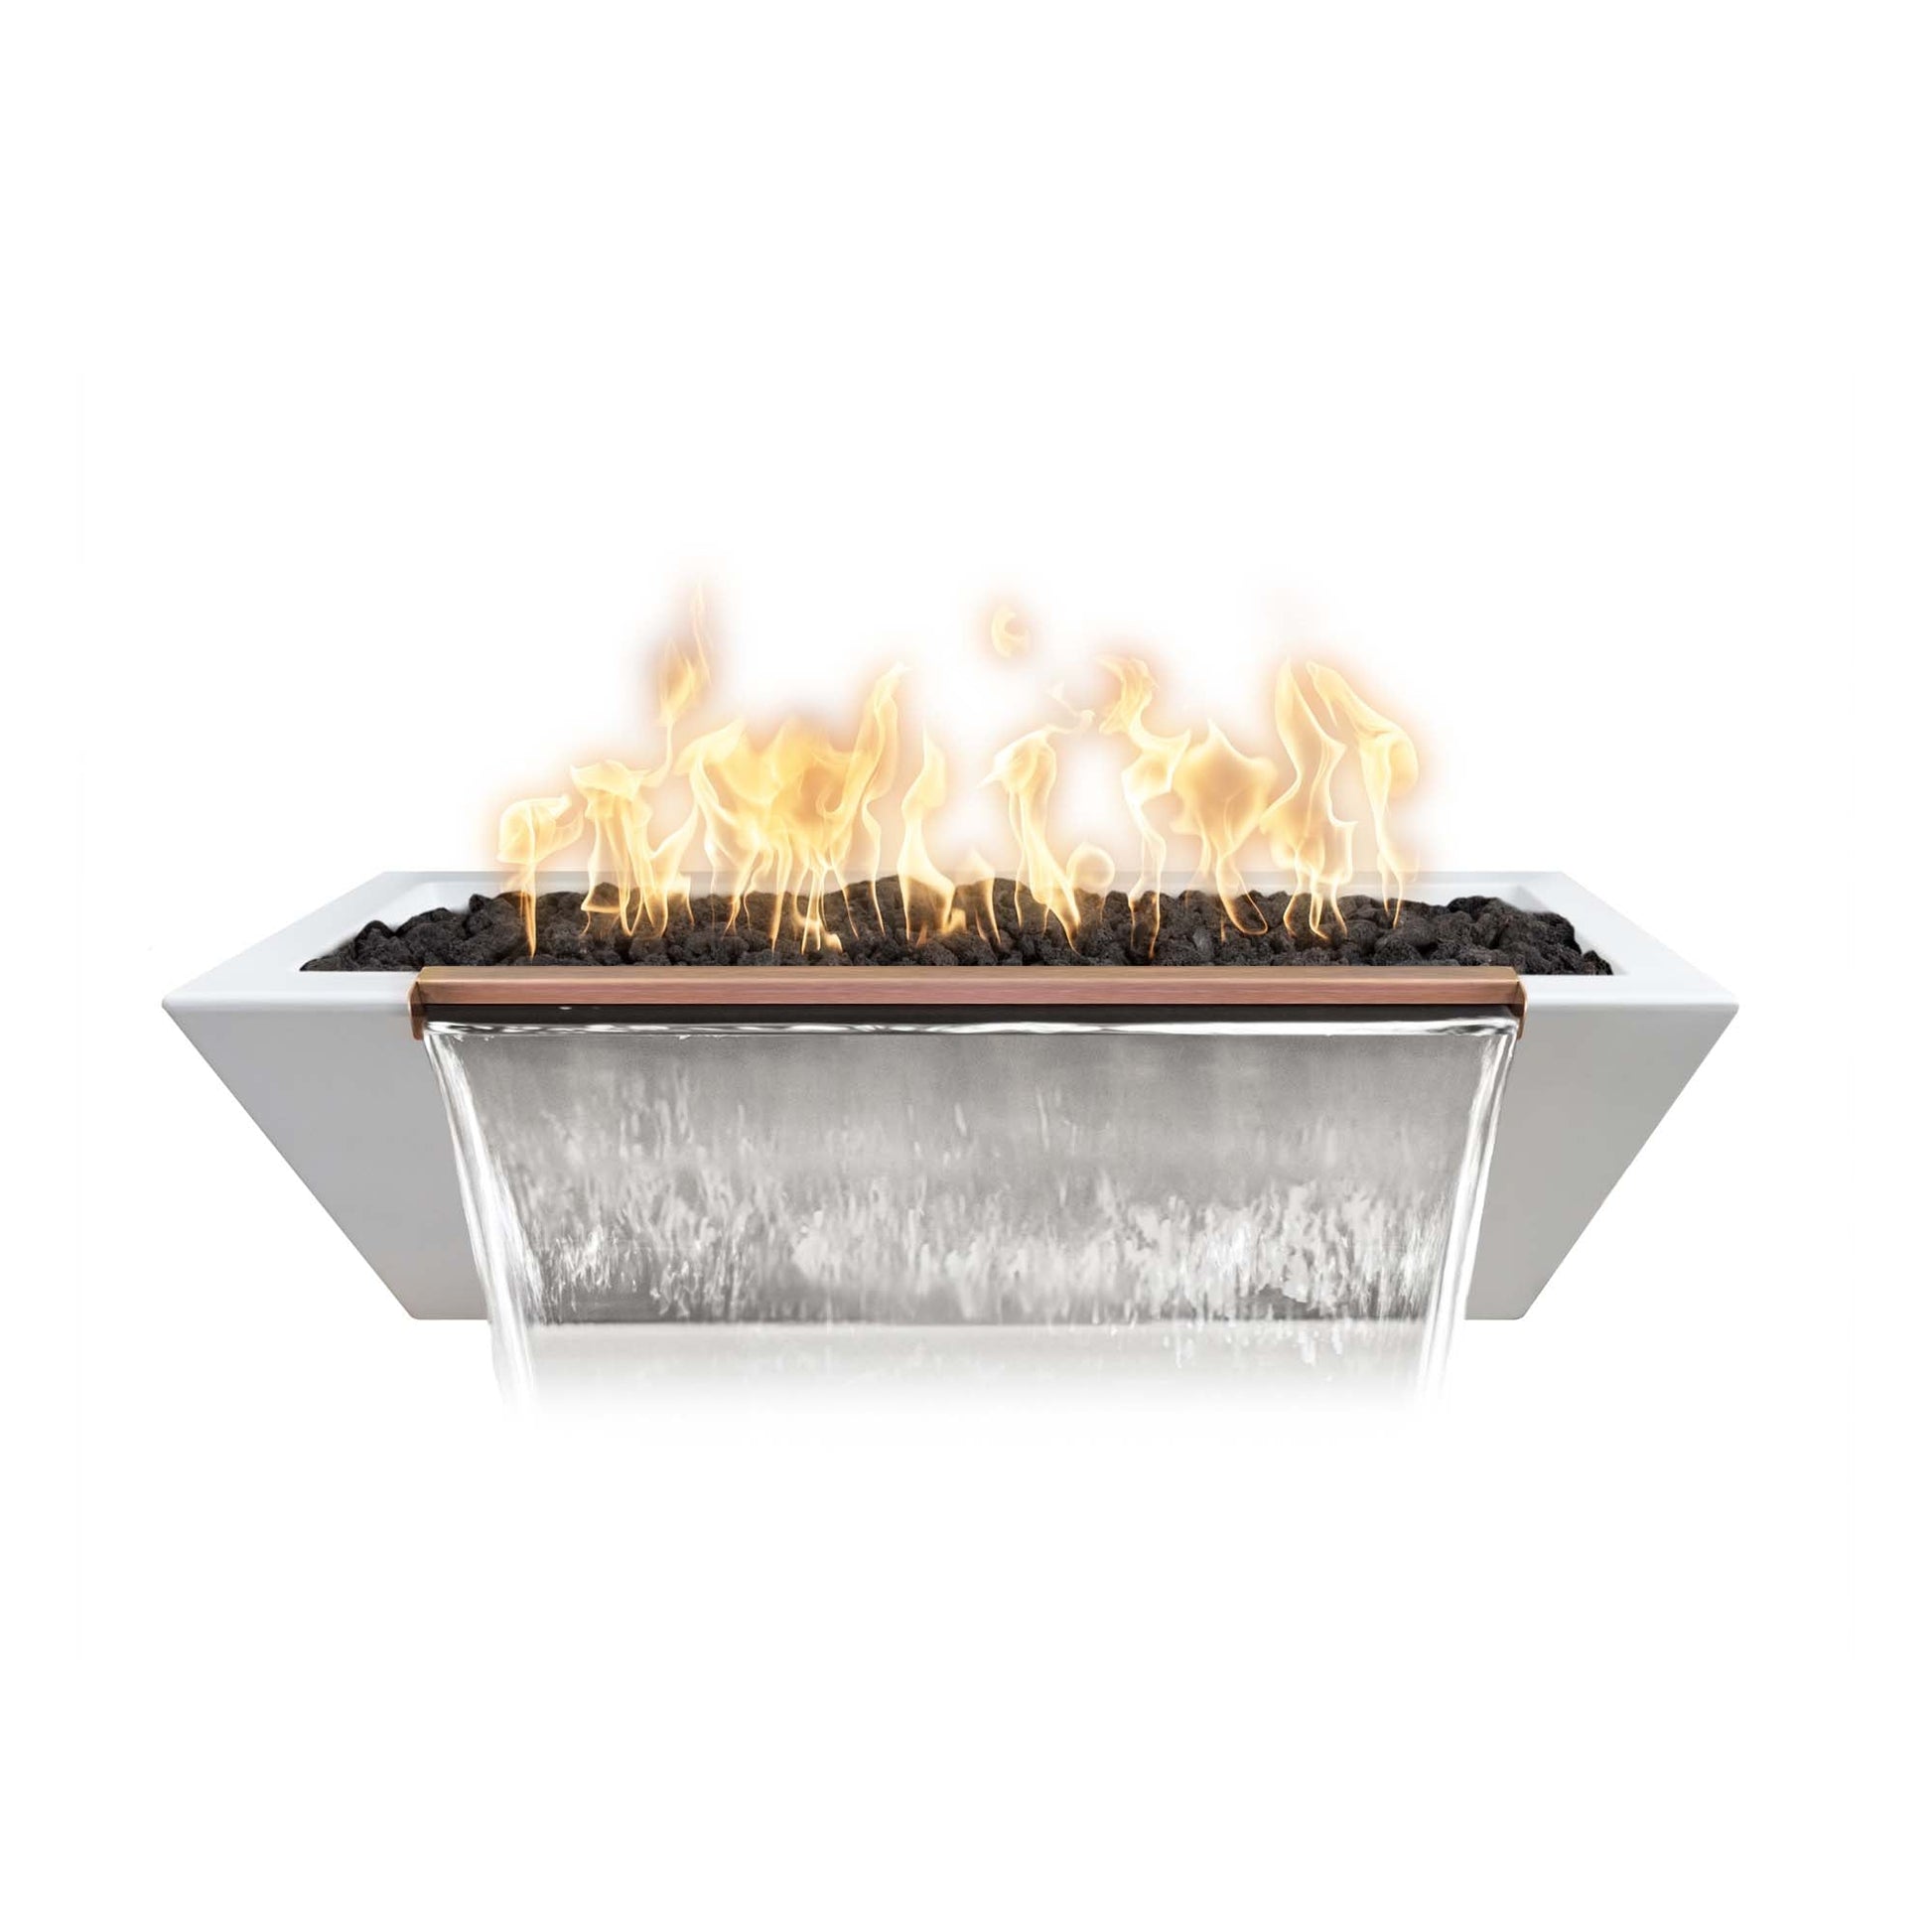 The Outdoor Plus Linear Maya 60" Metallic Copper GFRC Concrete Liquid Propane Fire & Water Bowl with Match Lit Ignition